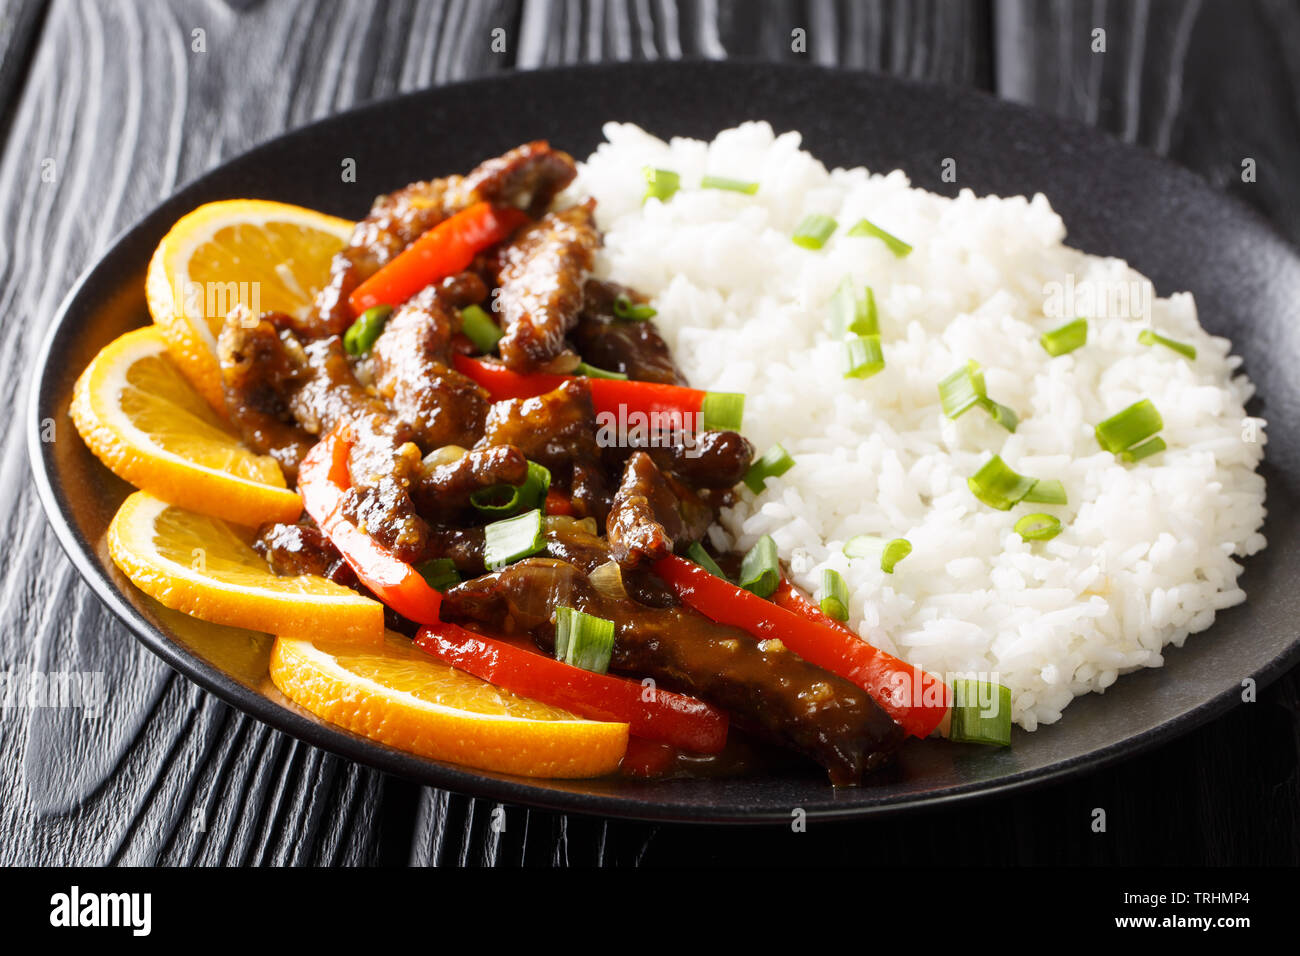 Fried Asian beef steak with sweet pepper in soybean orange sauce served with rice close-up on a plate on the table. horizontal Stock Photo